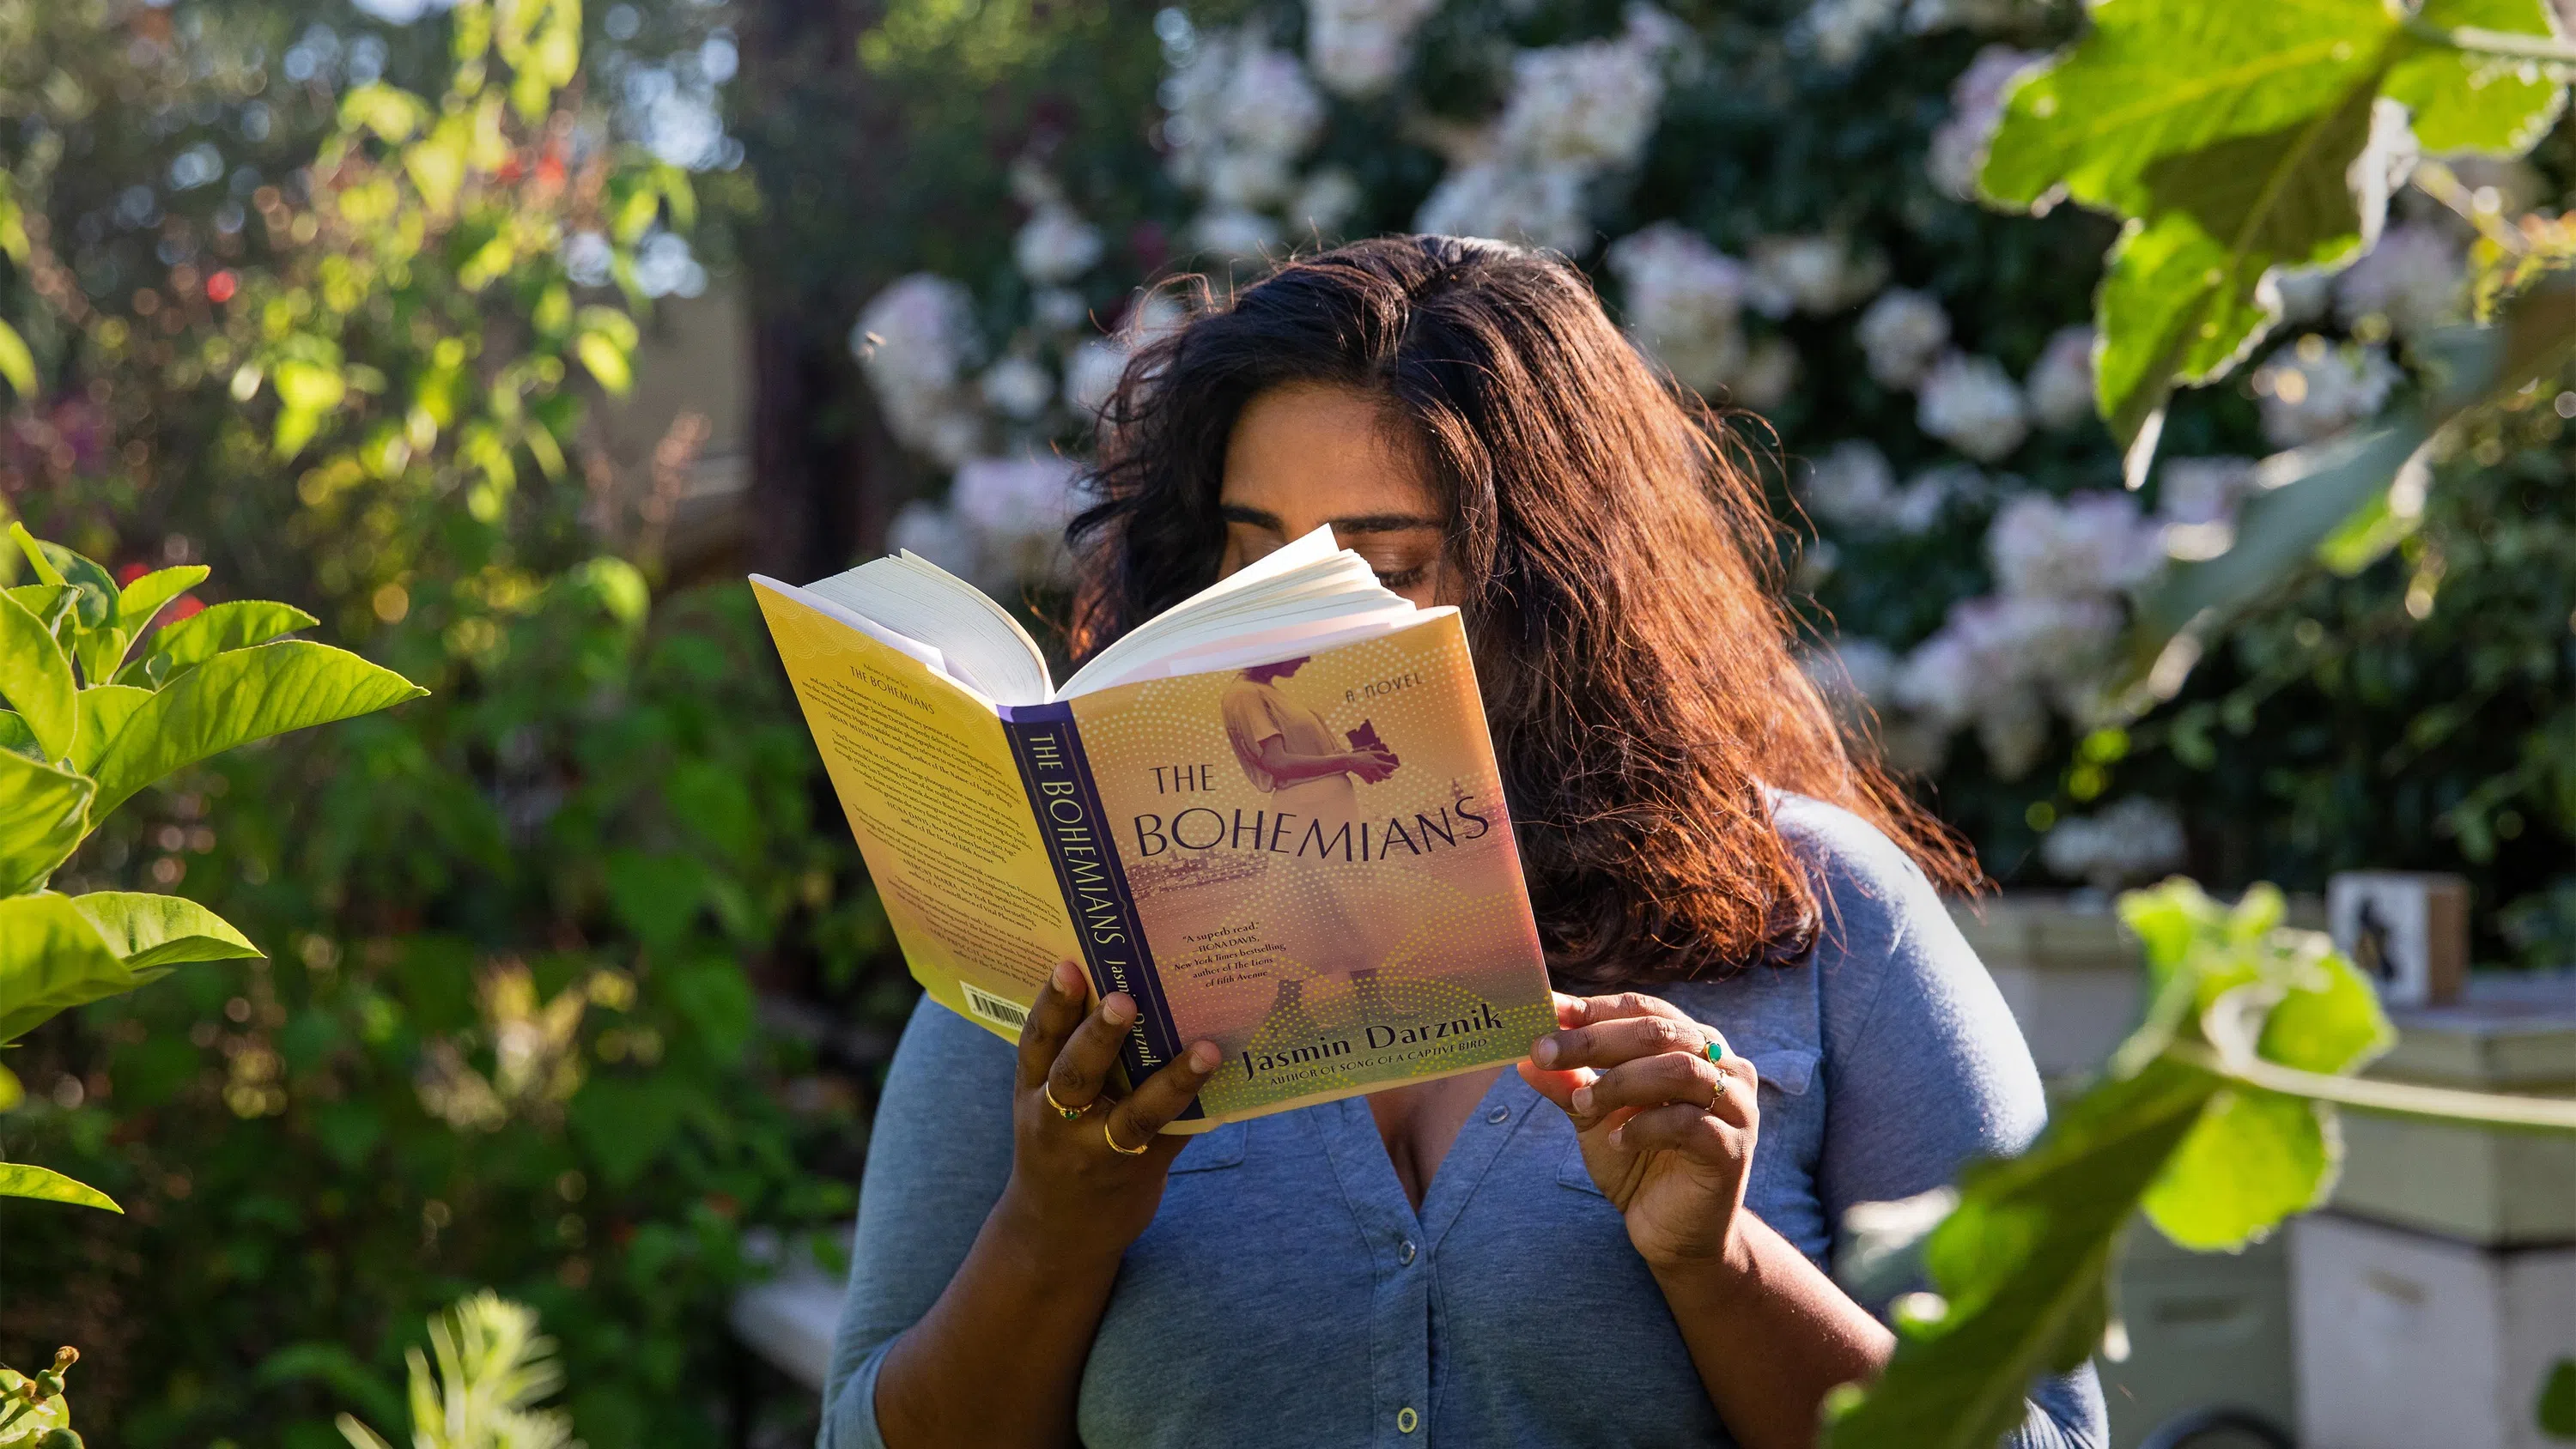 A person with curly hair reads Faculty Jasmin Darznik’s book The Bohemians.